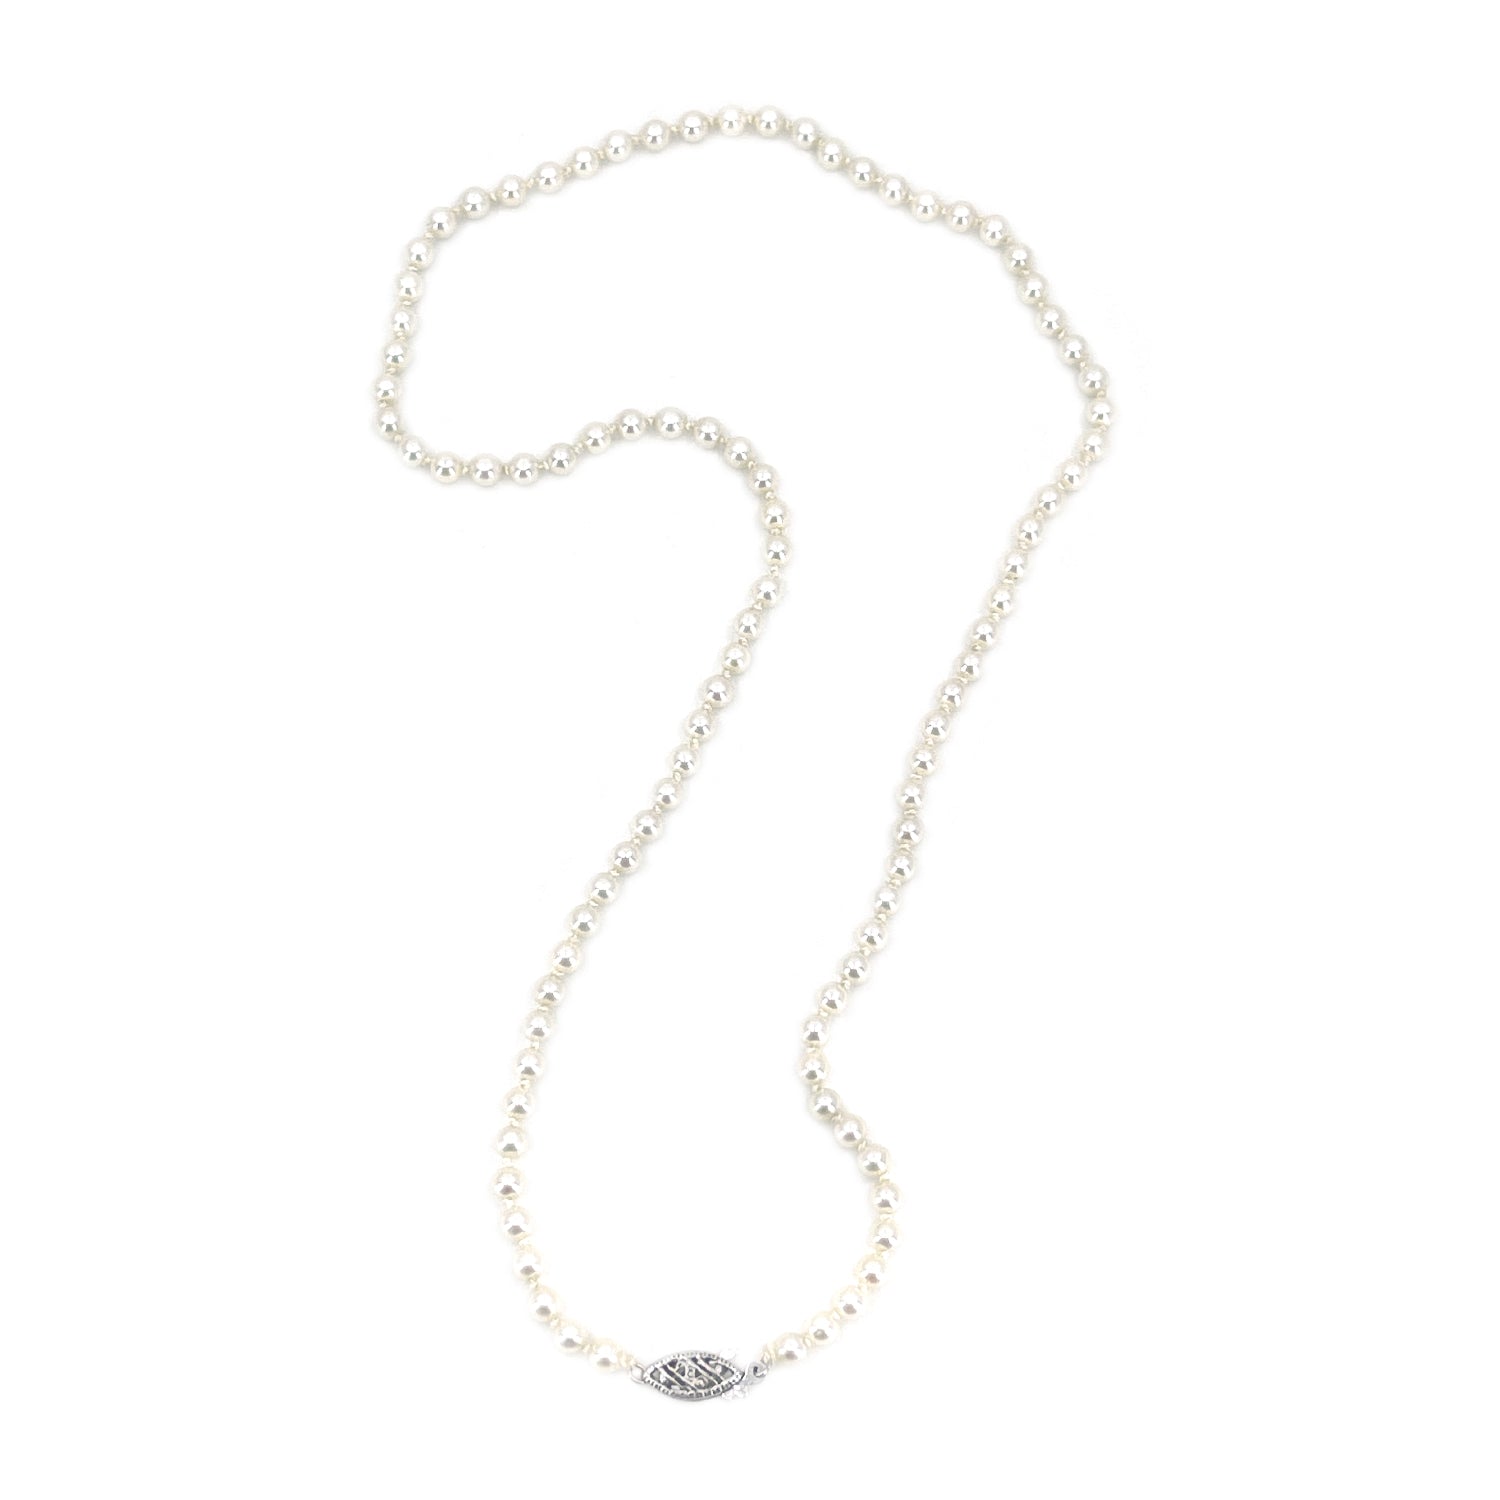 Seed Pearl Vintage Japanese Saltwater Cultured Akoya Pearl Necklace - 10K White Gold 16.75 Inch